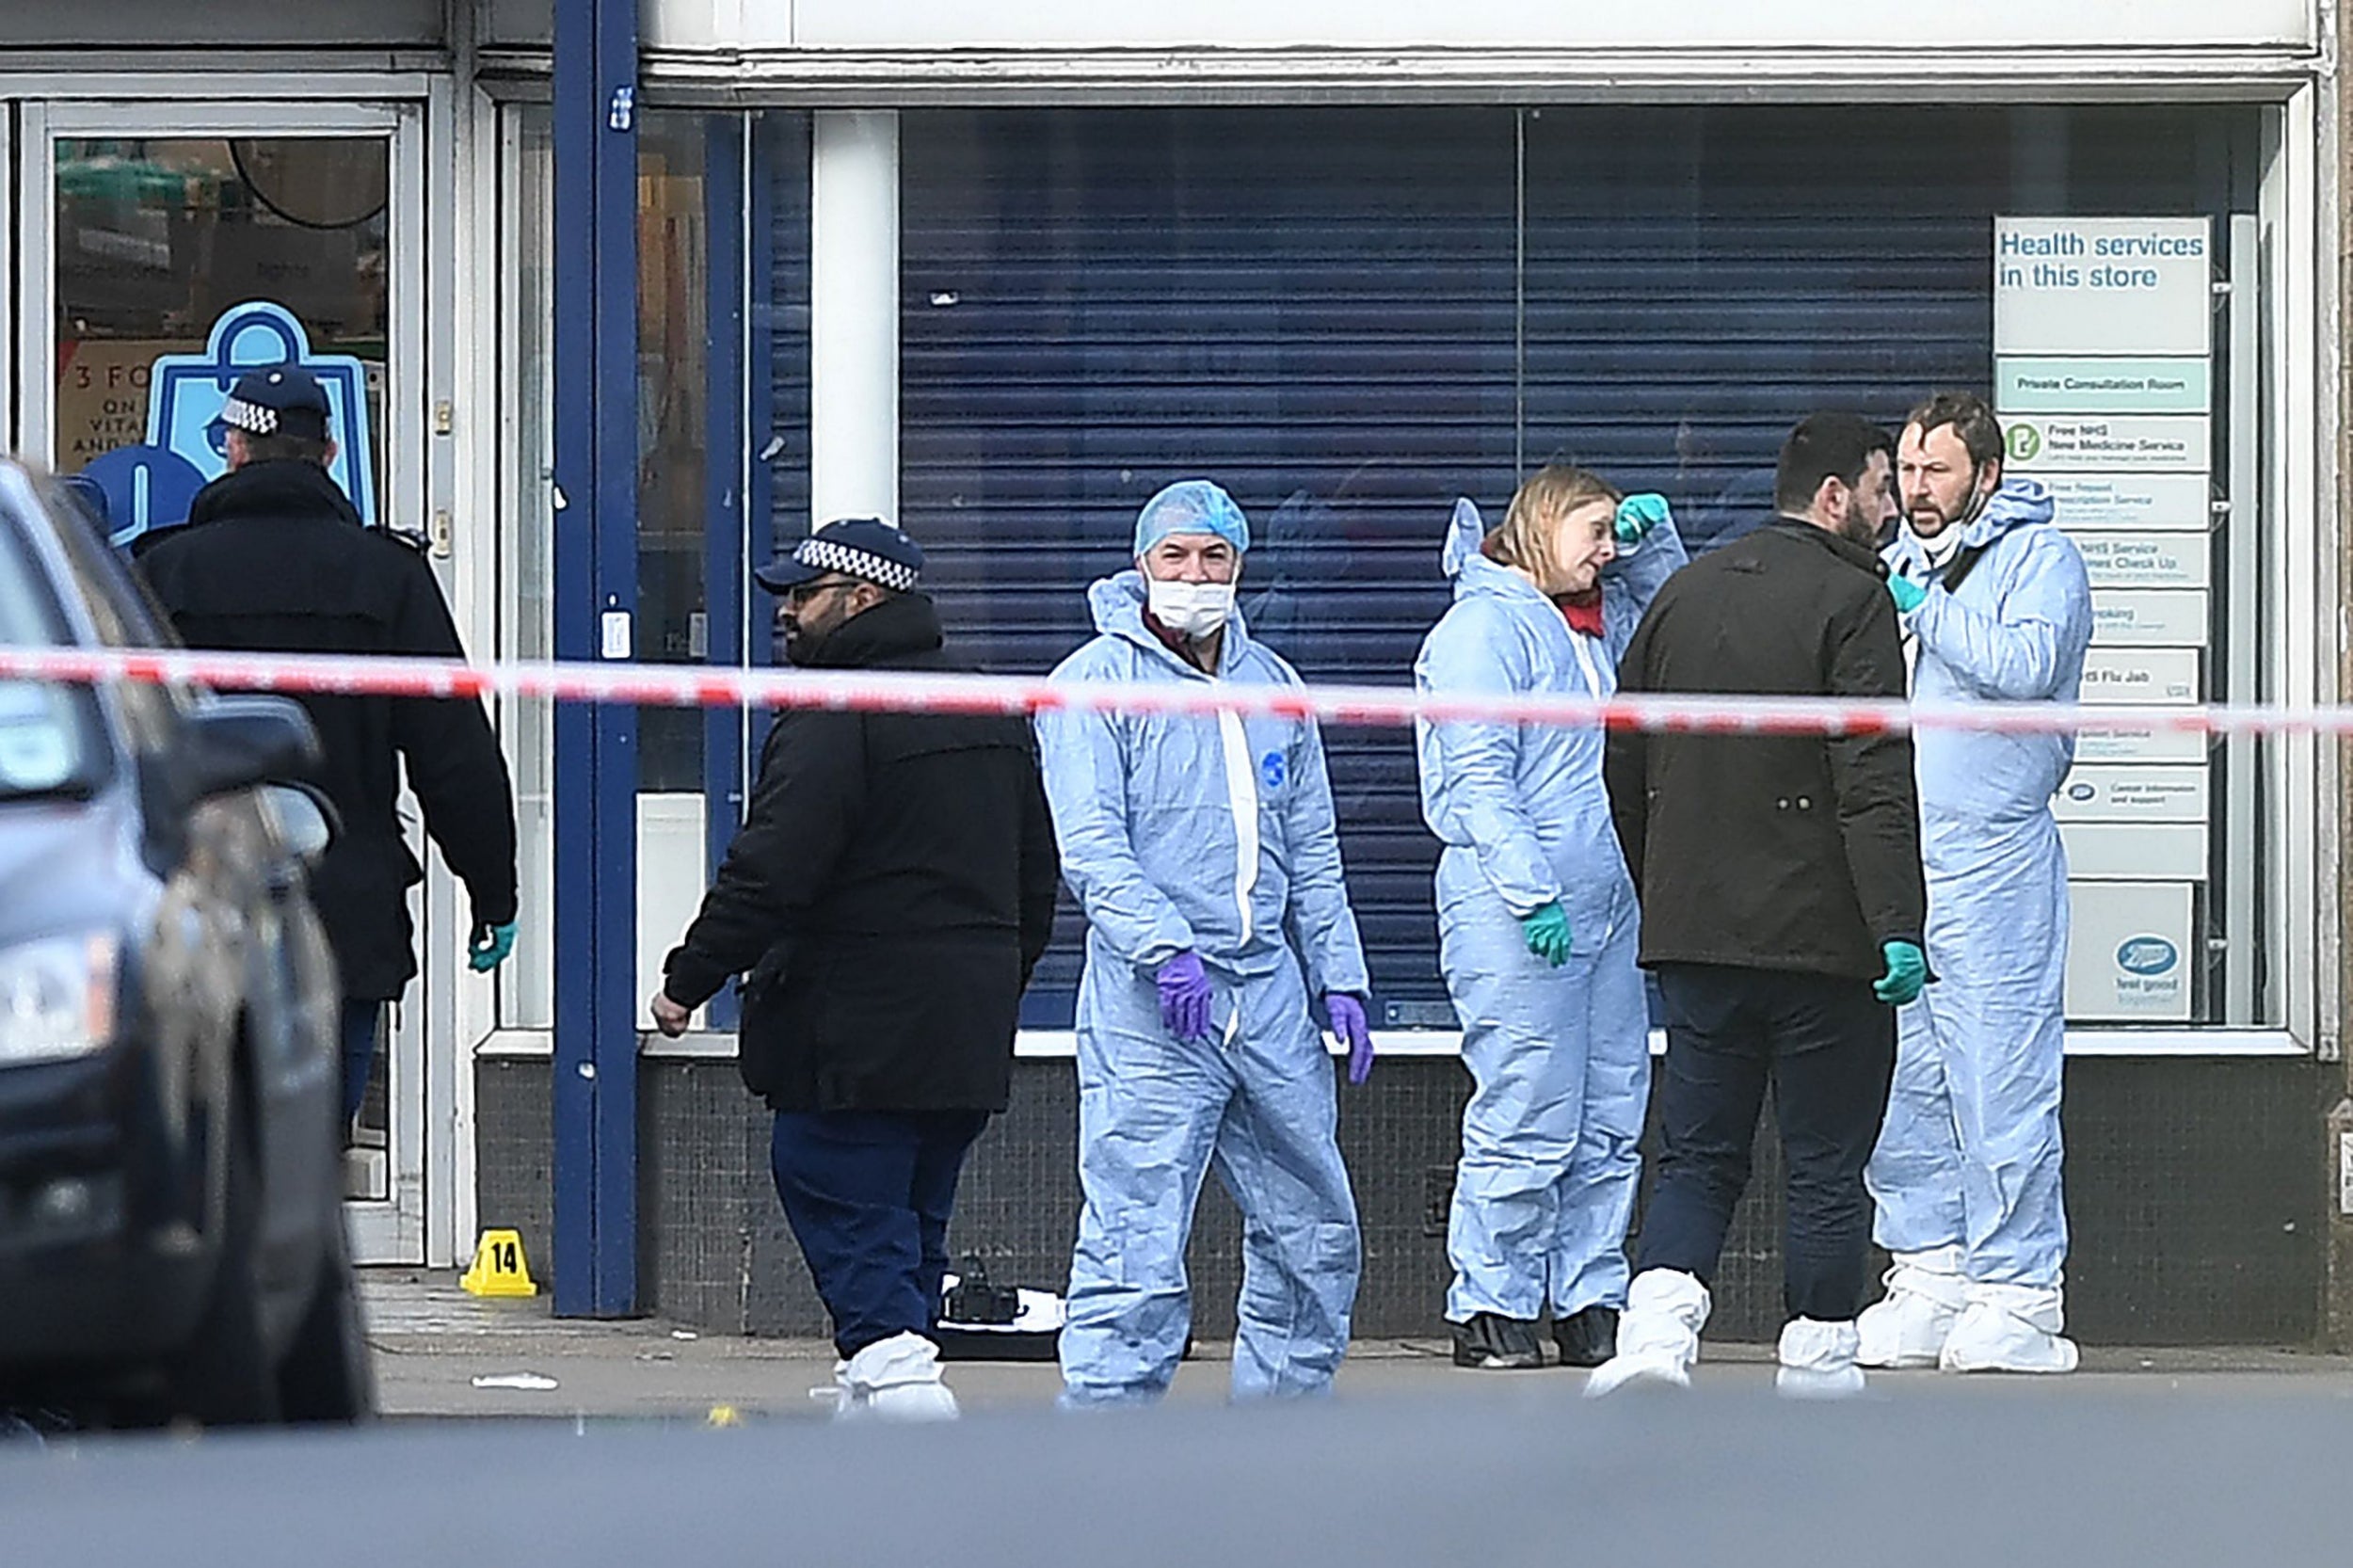 The law was proposed as emergency legislation after the Streatham attack, where two people were stabbed but survived